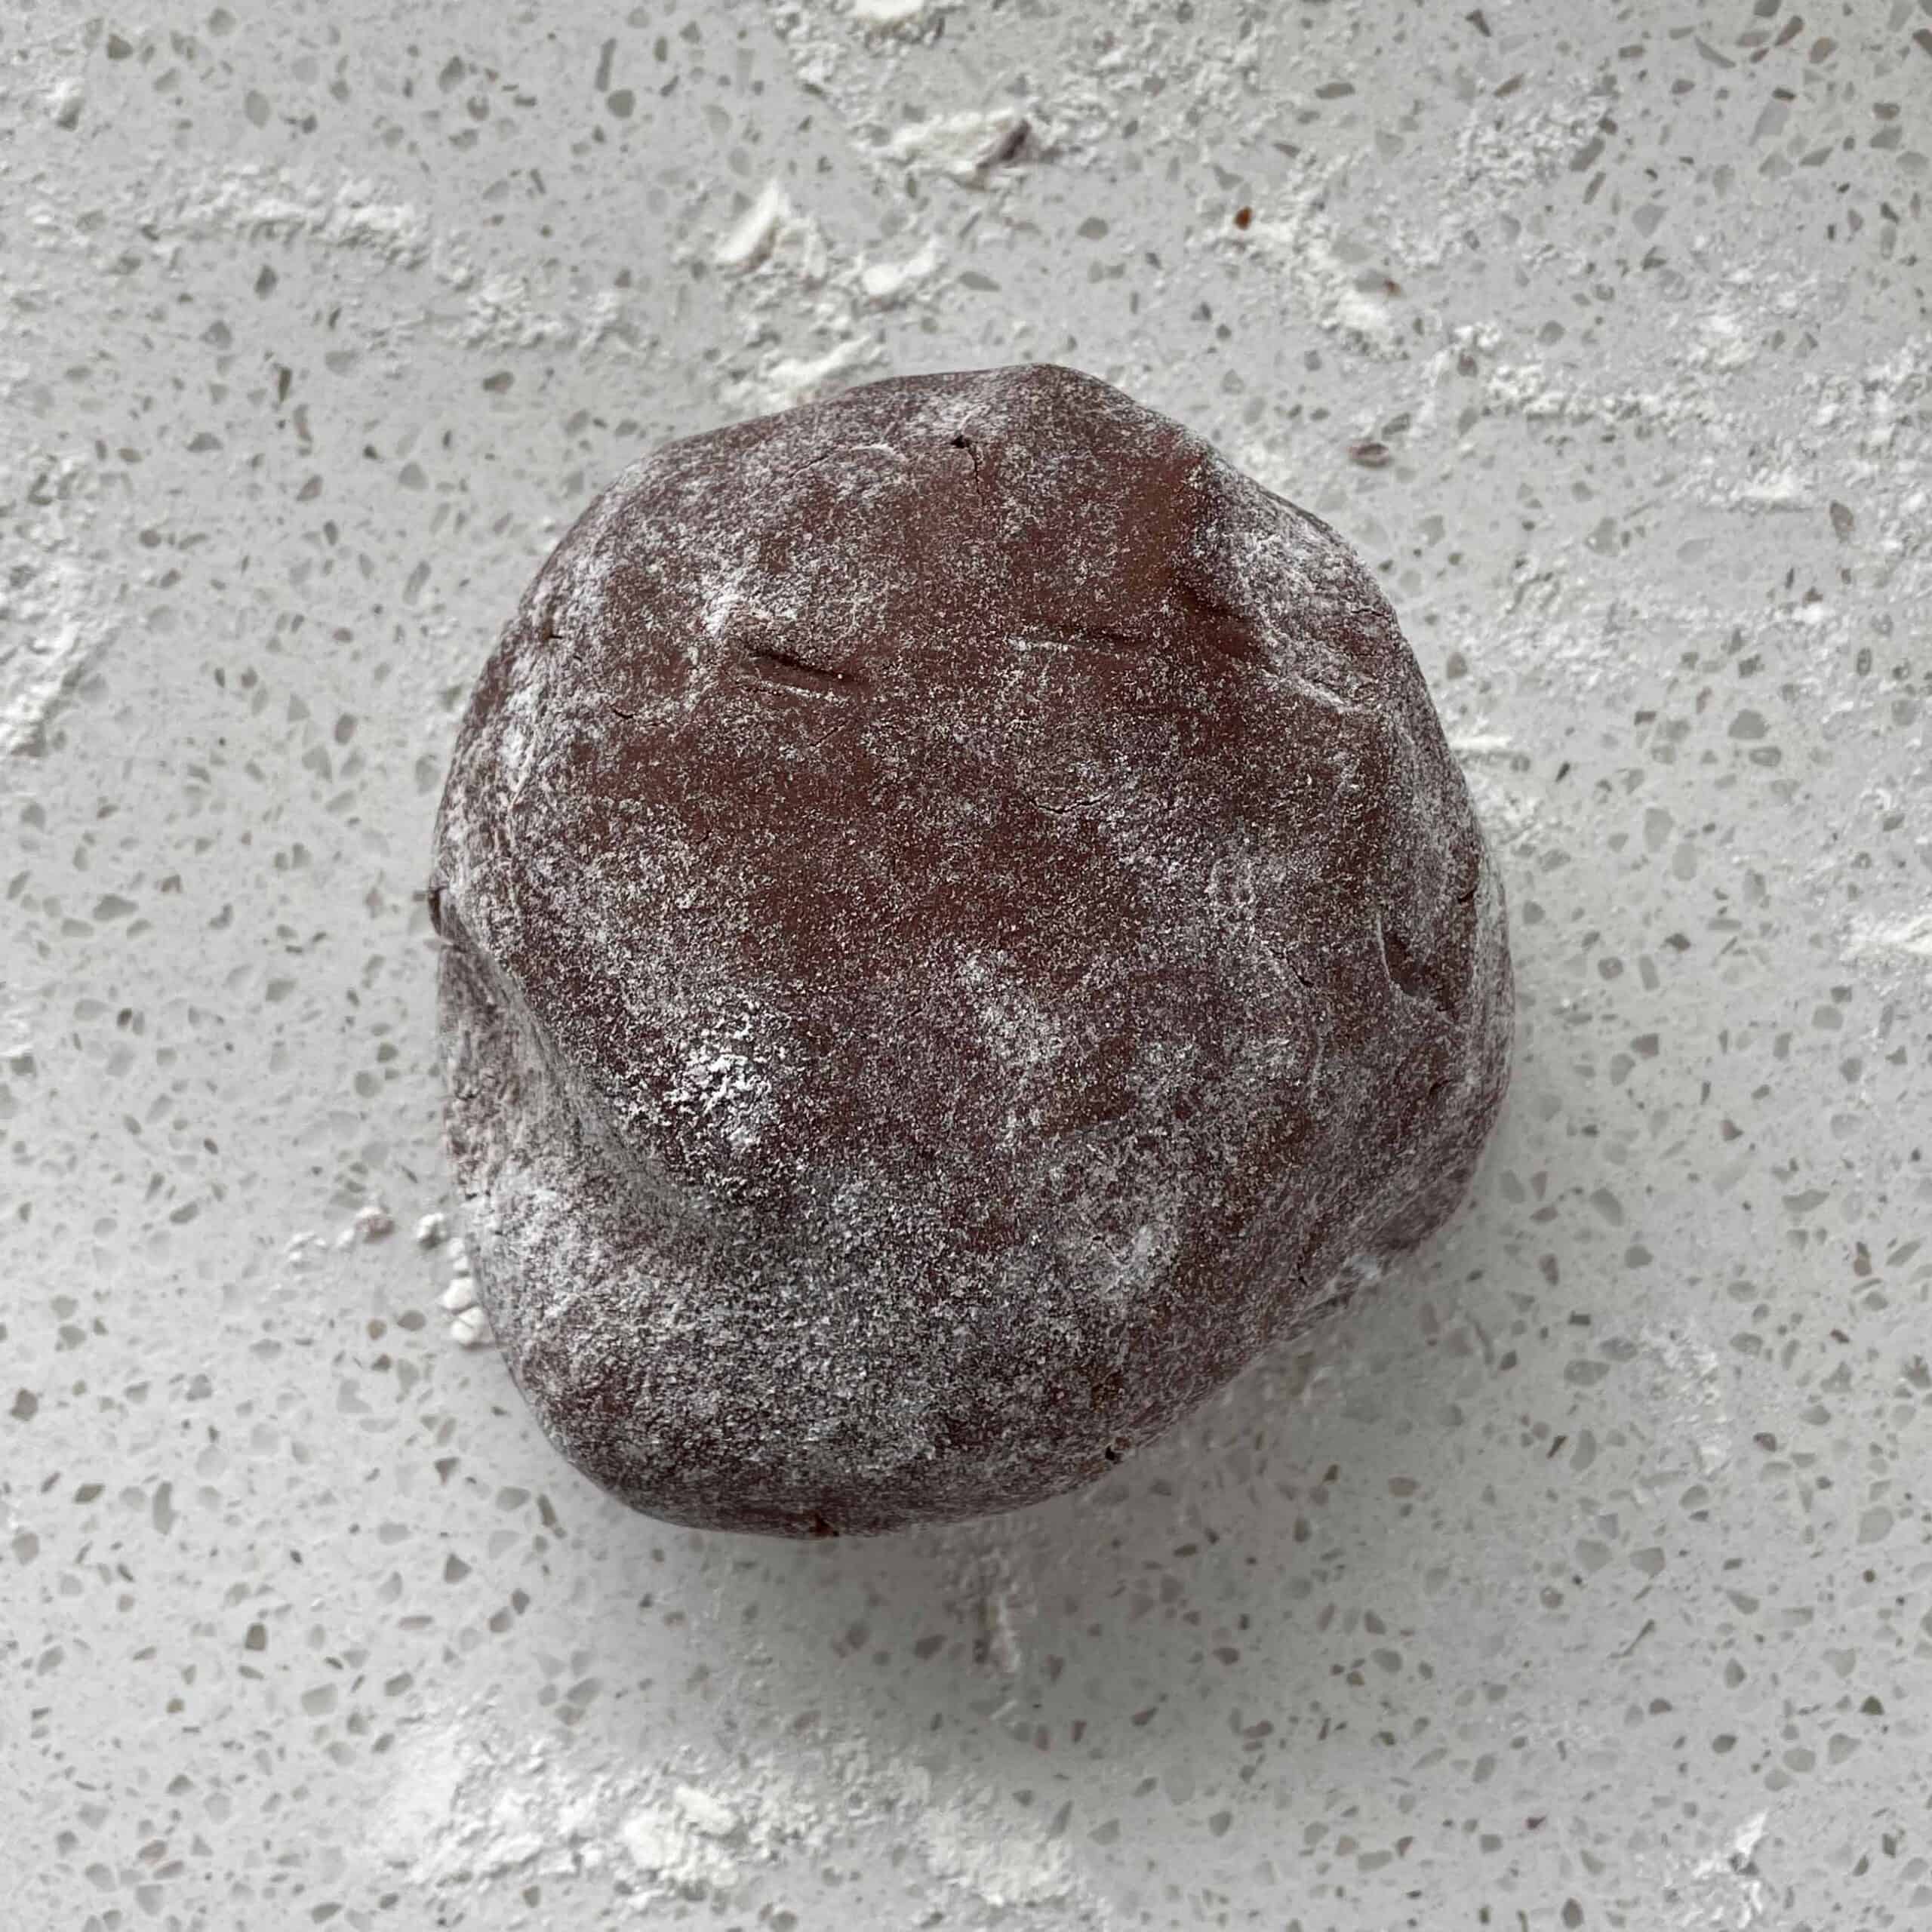 A ball of chocolate shortbread dough covered in flour on a white bench.